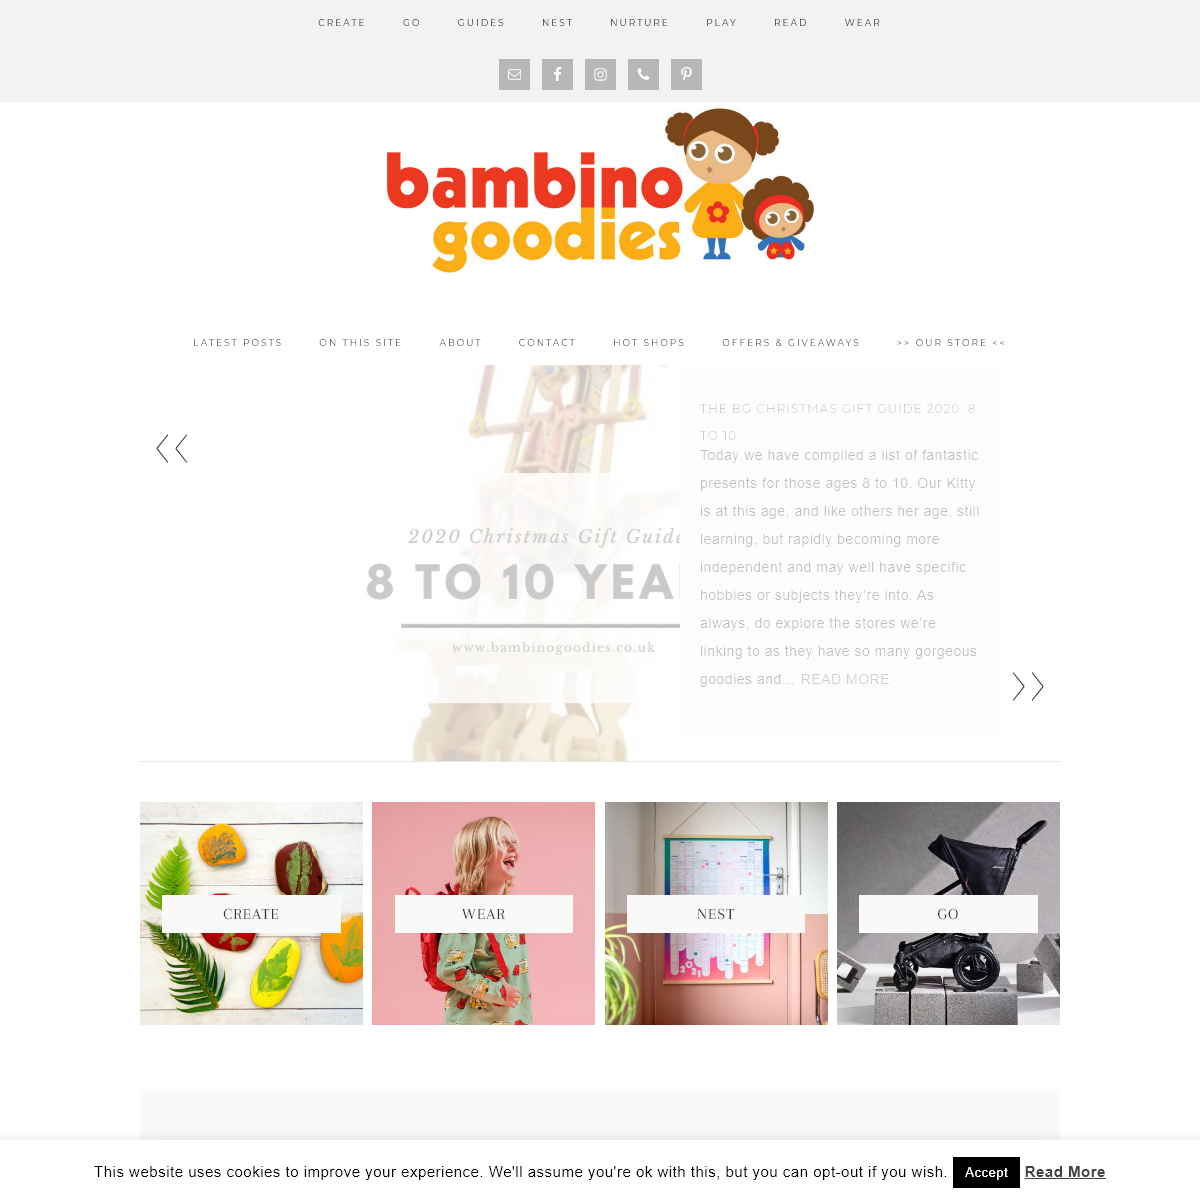 Cool things for children, curated by the team at Bambino Goodies - Cool things for children, curated by the Claire & Lu at Bambi